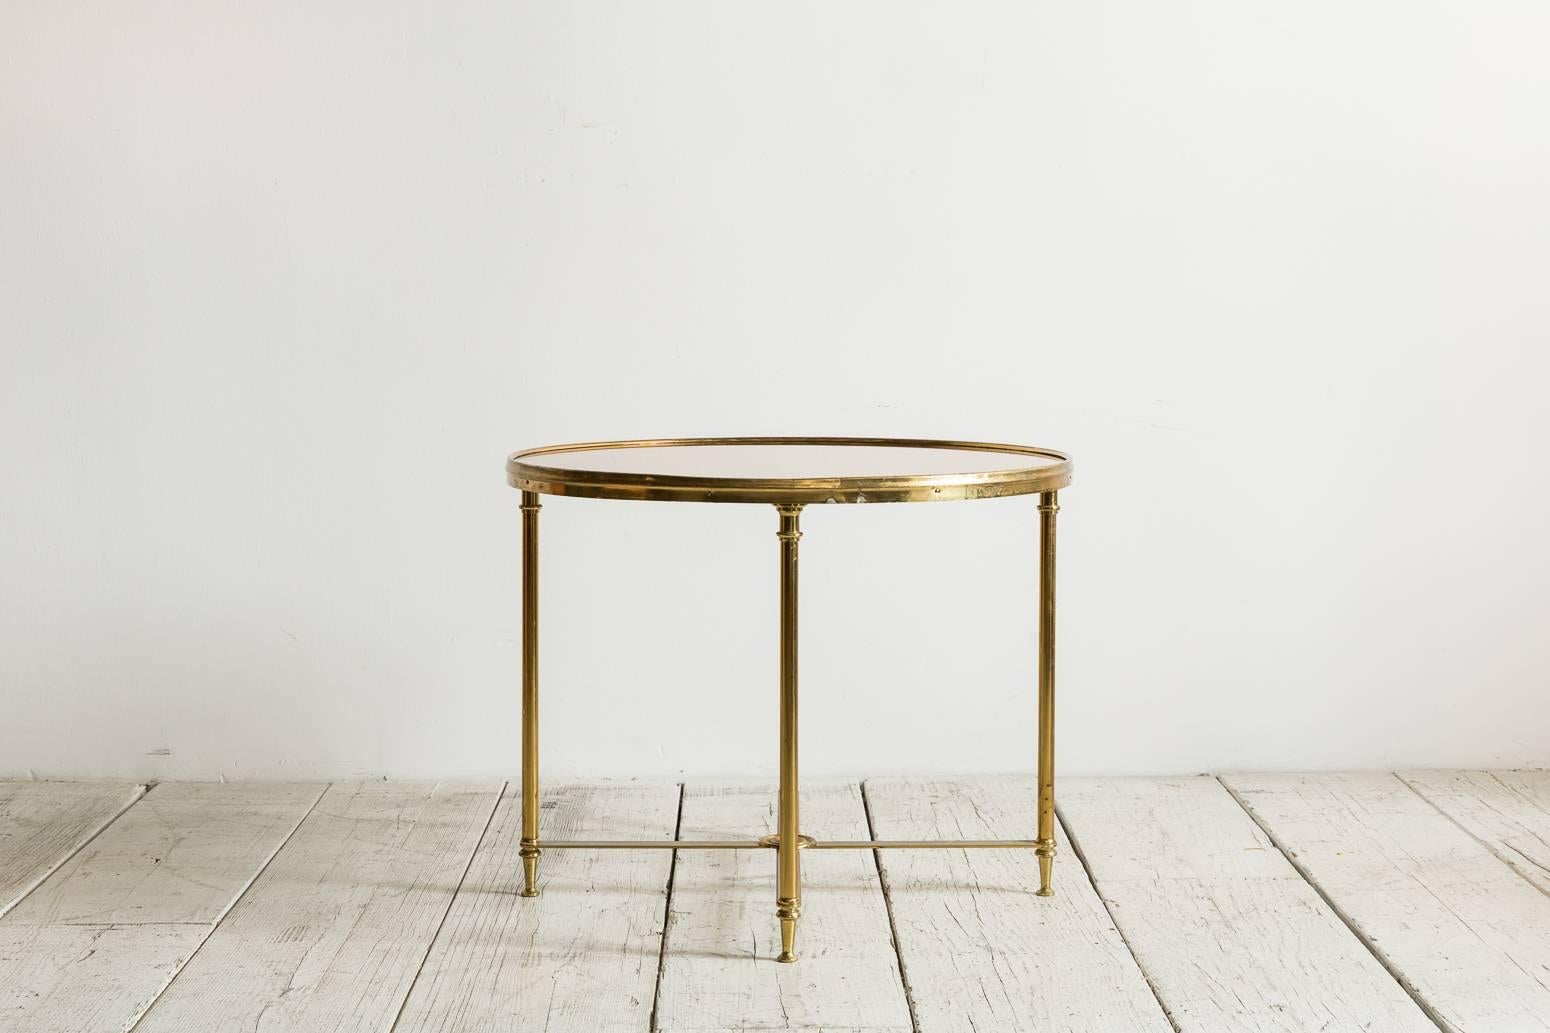 Brass framed rose mirror round side table from France.